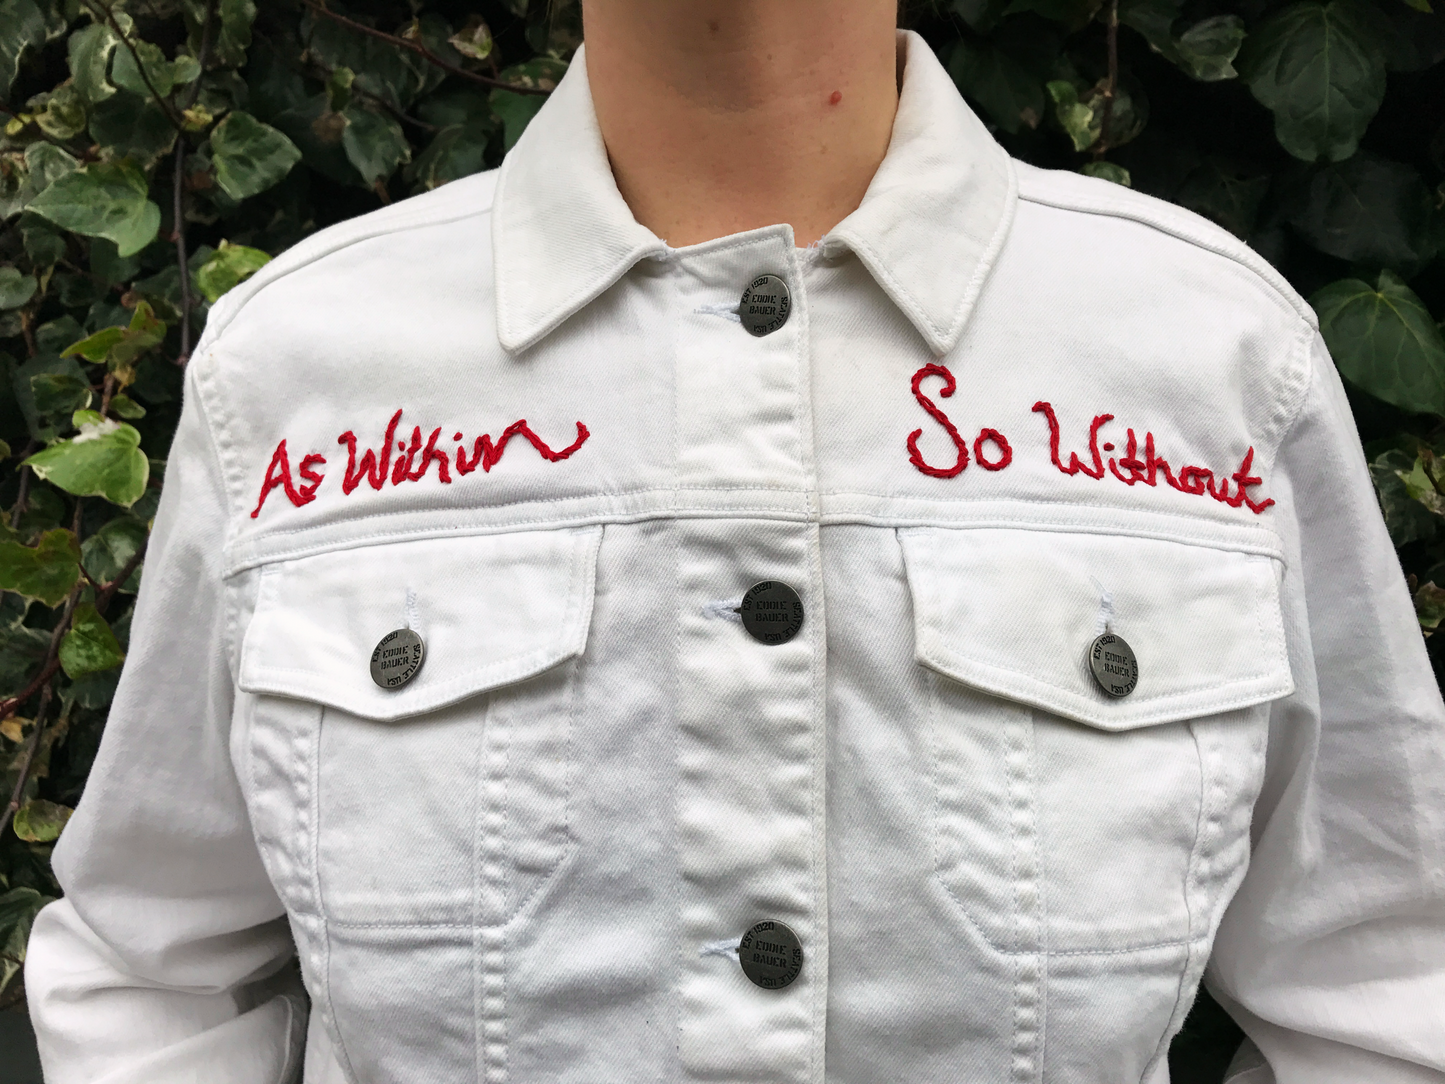 As Above, So Below Embroidered White Denim Jacket. Number 2